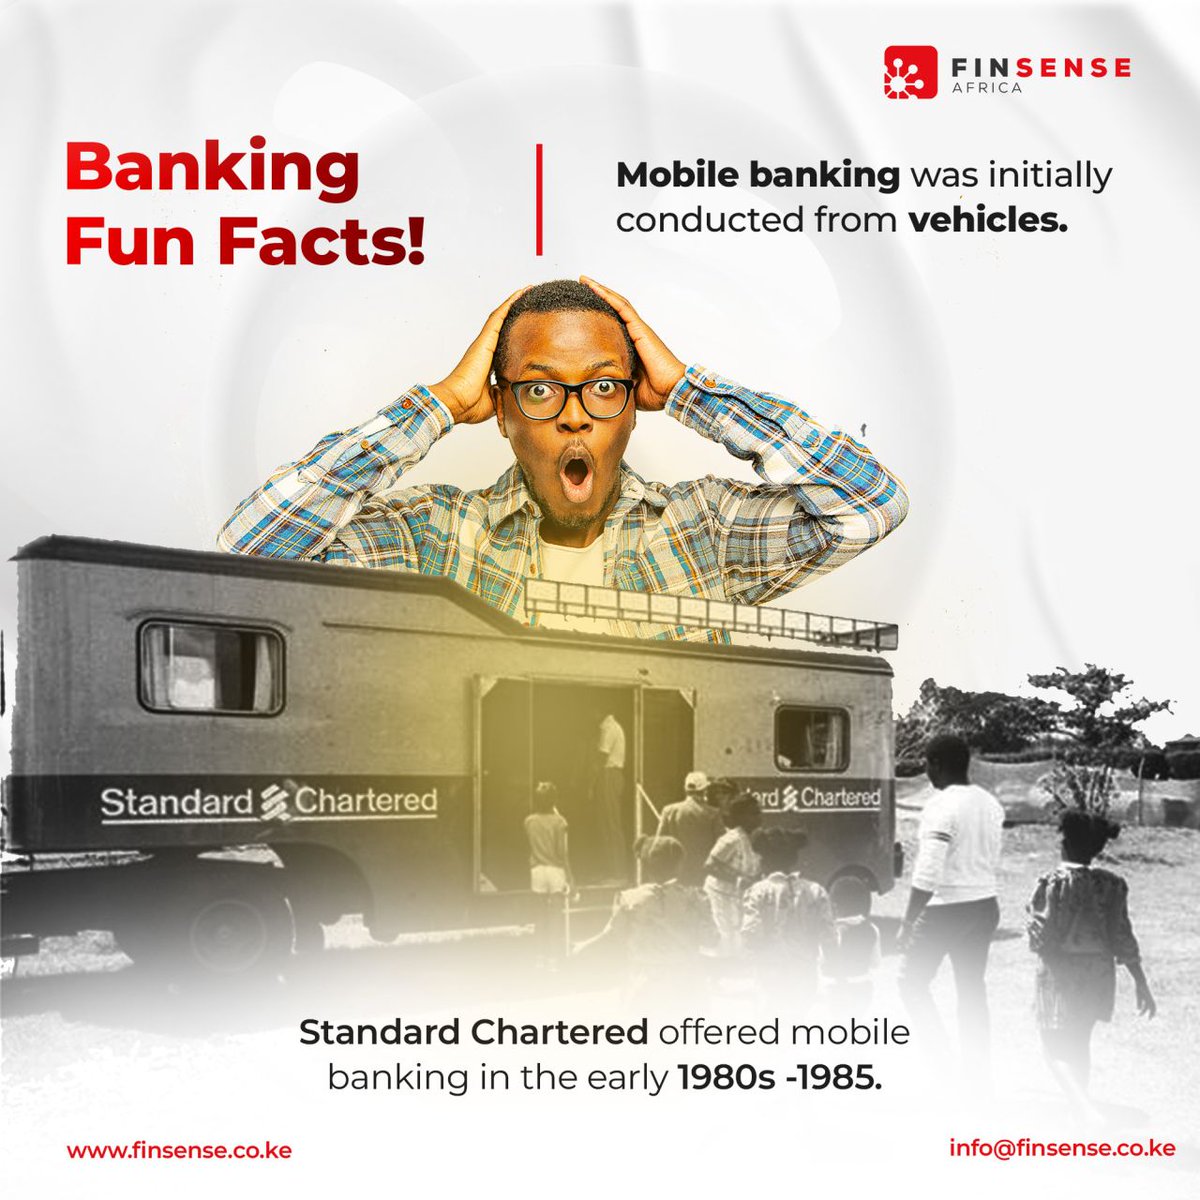 Throwback Thursday: Who remembers mobile banking vans? Believe it or not, before smartphones, mobile banking meant actual vehicles! Standard Chartered was a frontrunner in the 80s, bringing banking services straight to customers. #fintechhistory #tbt